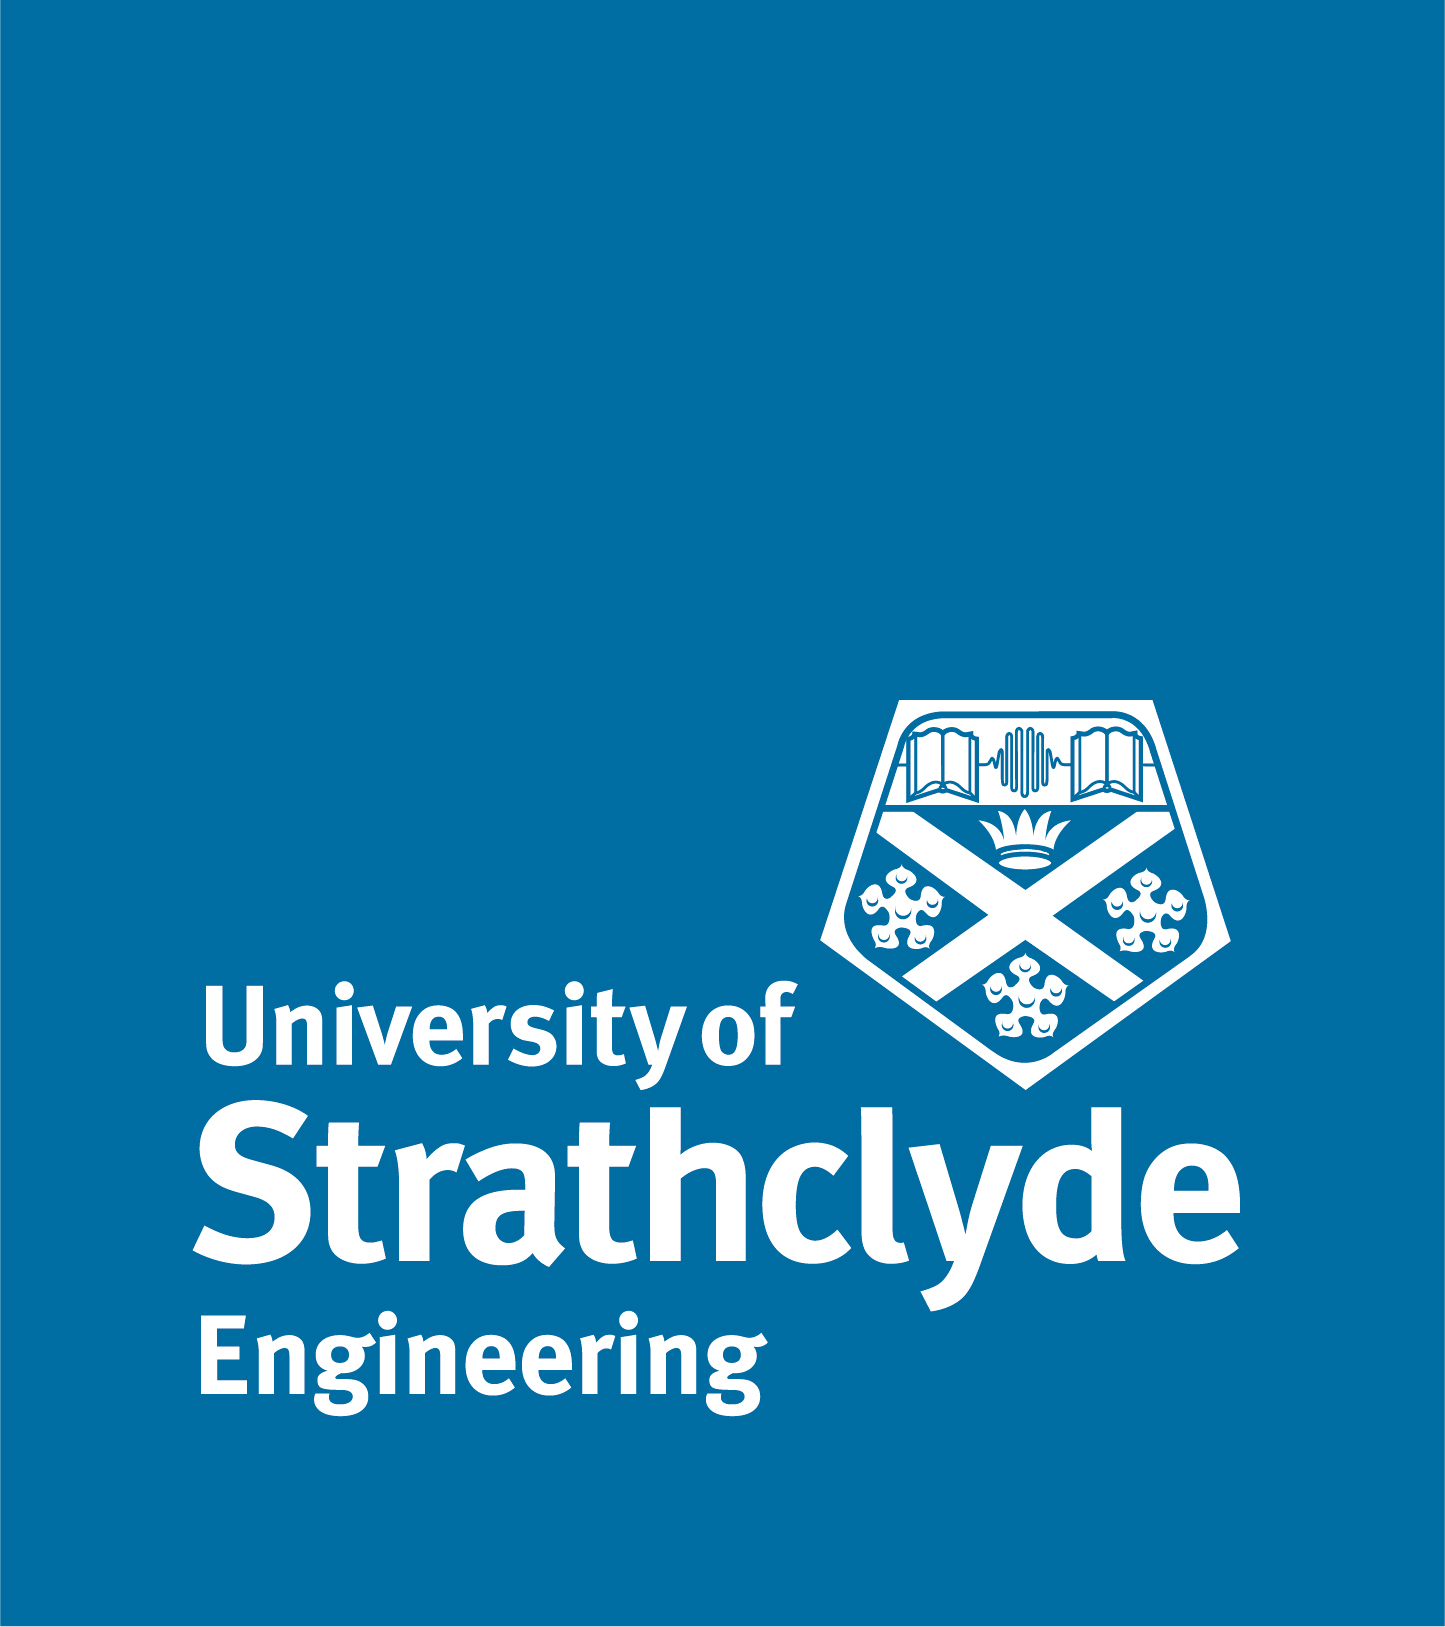 blue background with university logo and university of strathclyde engineering in white